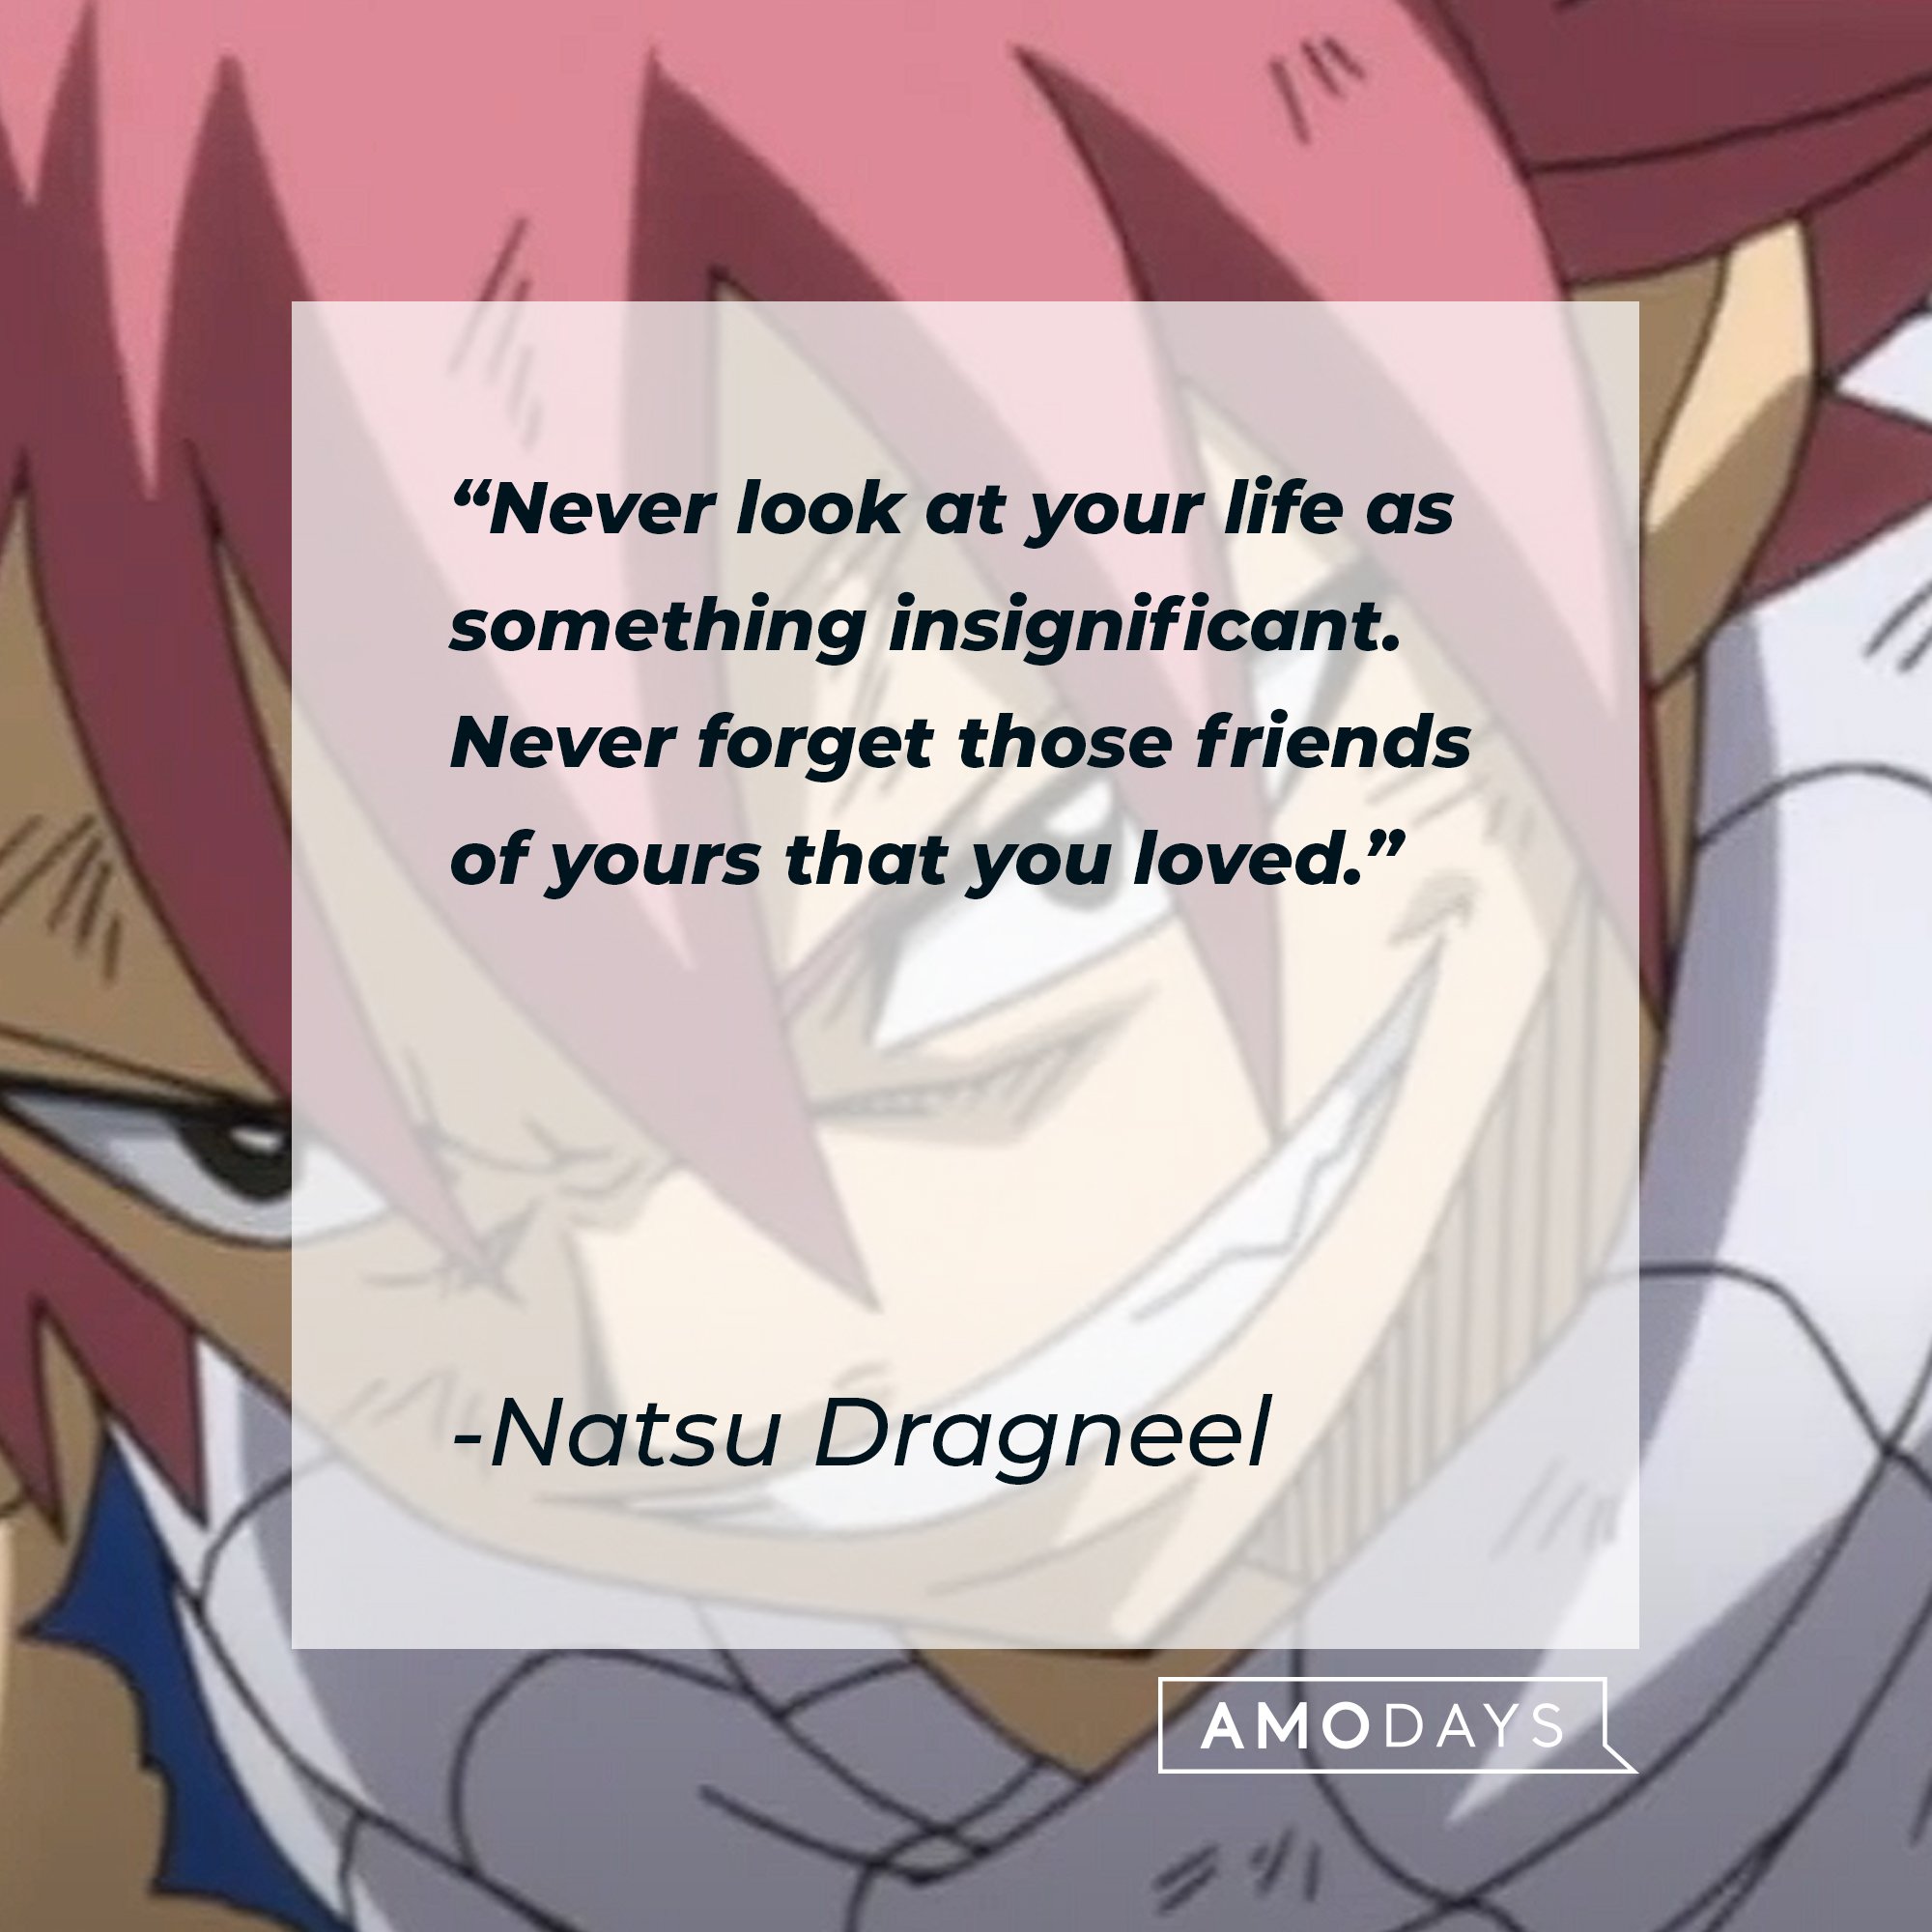 Natsu Dragneel’s quote: "Never look at your life as something insignificant. Never forget those friends of yours that you loved." | Image: AmoDays